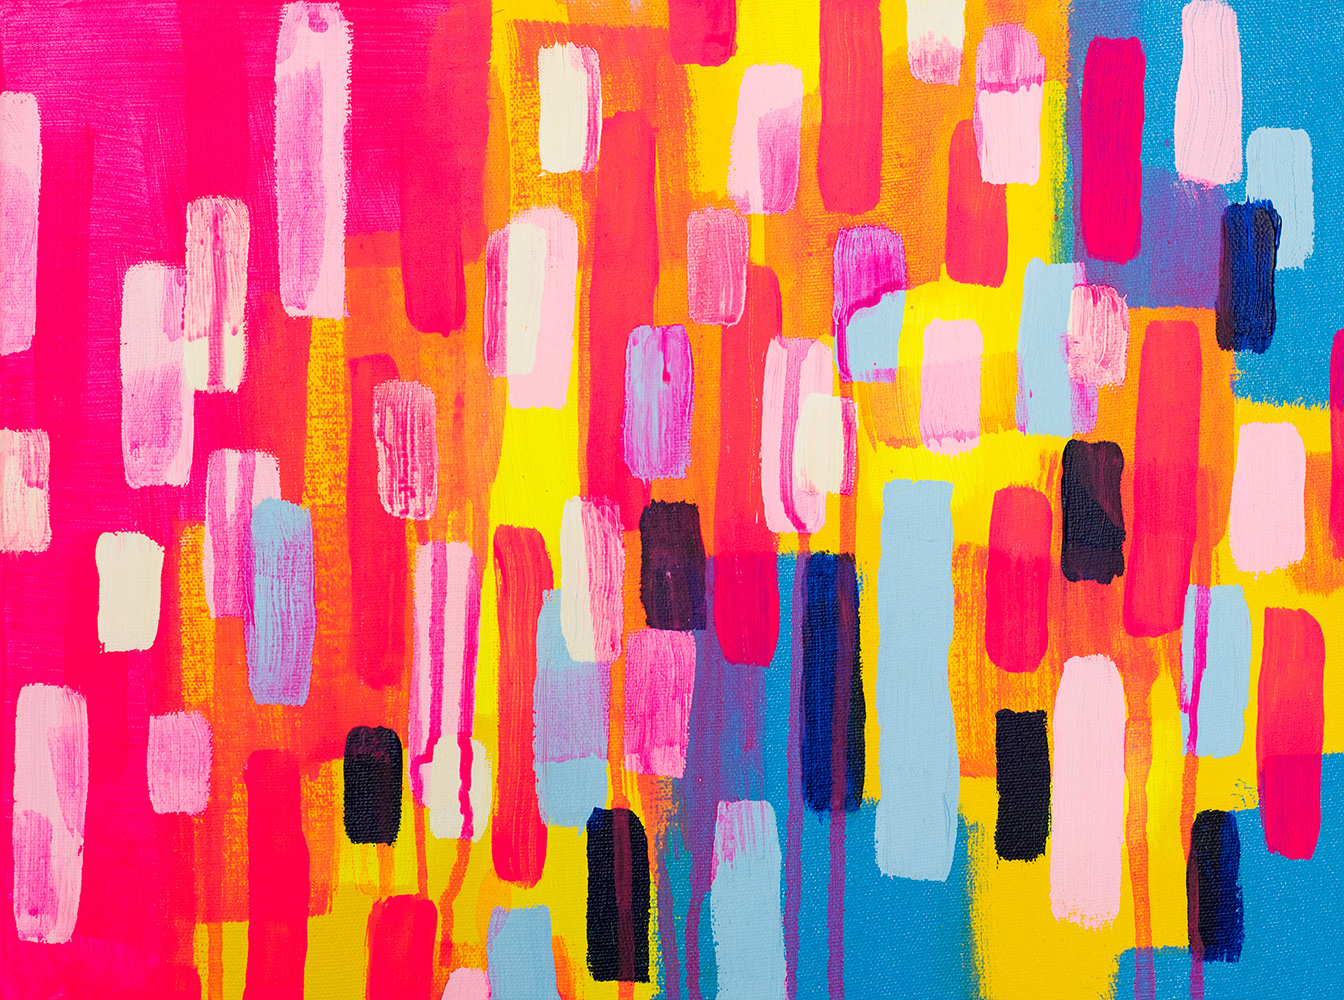 Franziska Schwade - Daily Painting 151025 "Neon Cities" Acrylics on stretched canvas 40x30 cm / 15.7x11.8 inch